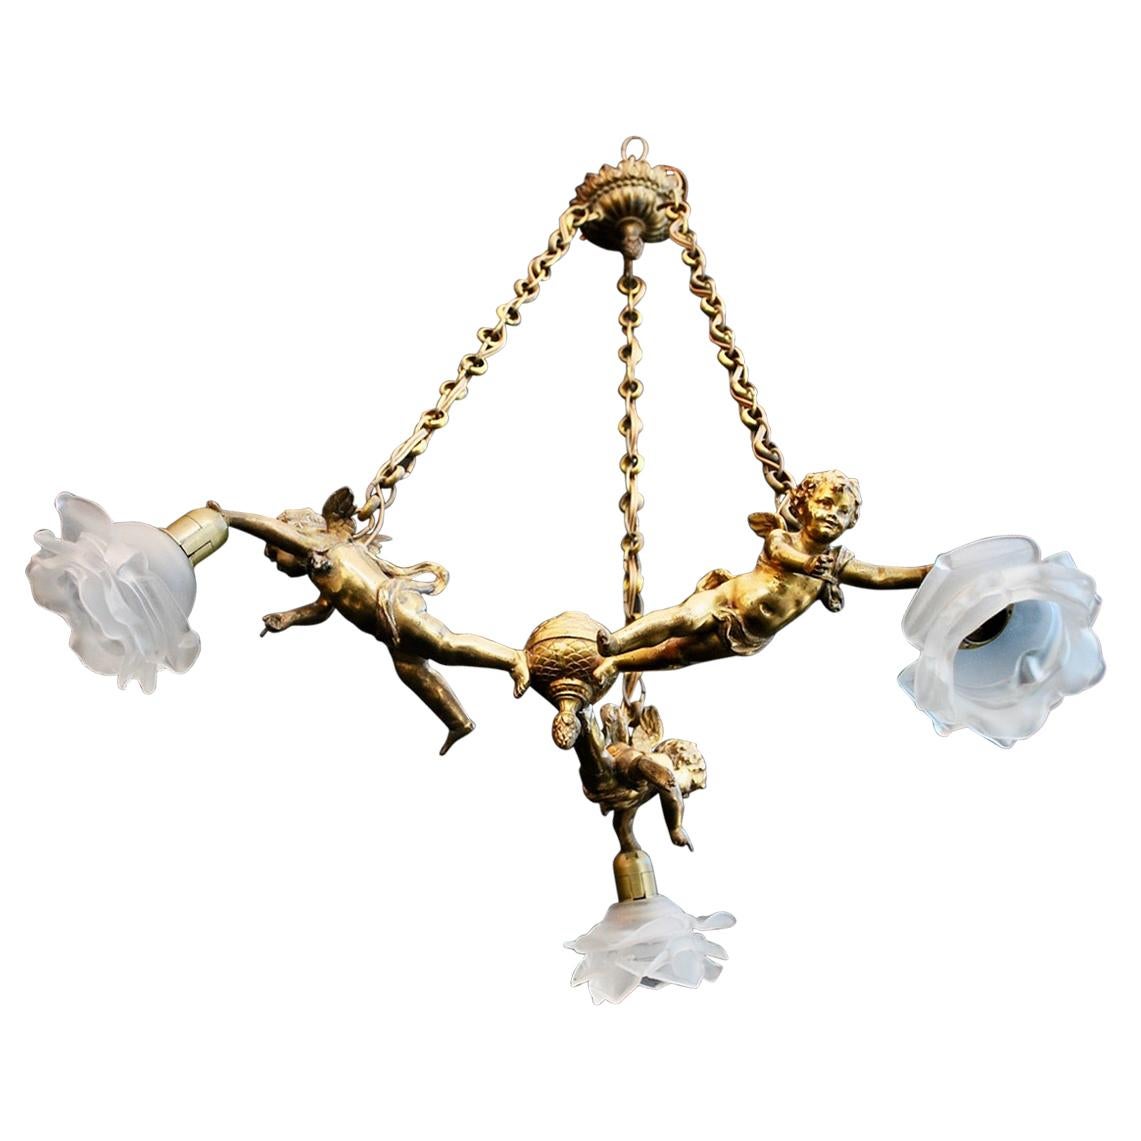 Beautiful and Rare French 1920s Angels Chandelier